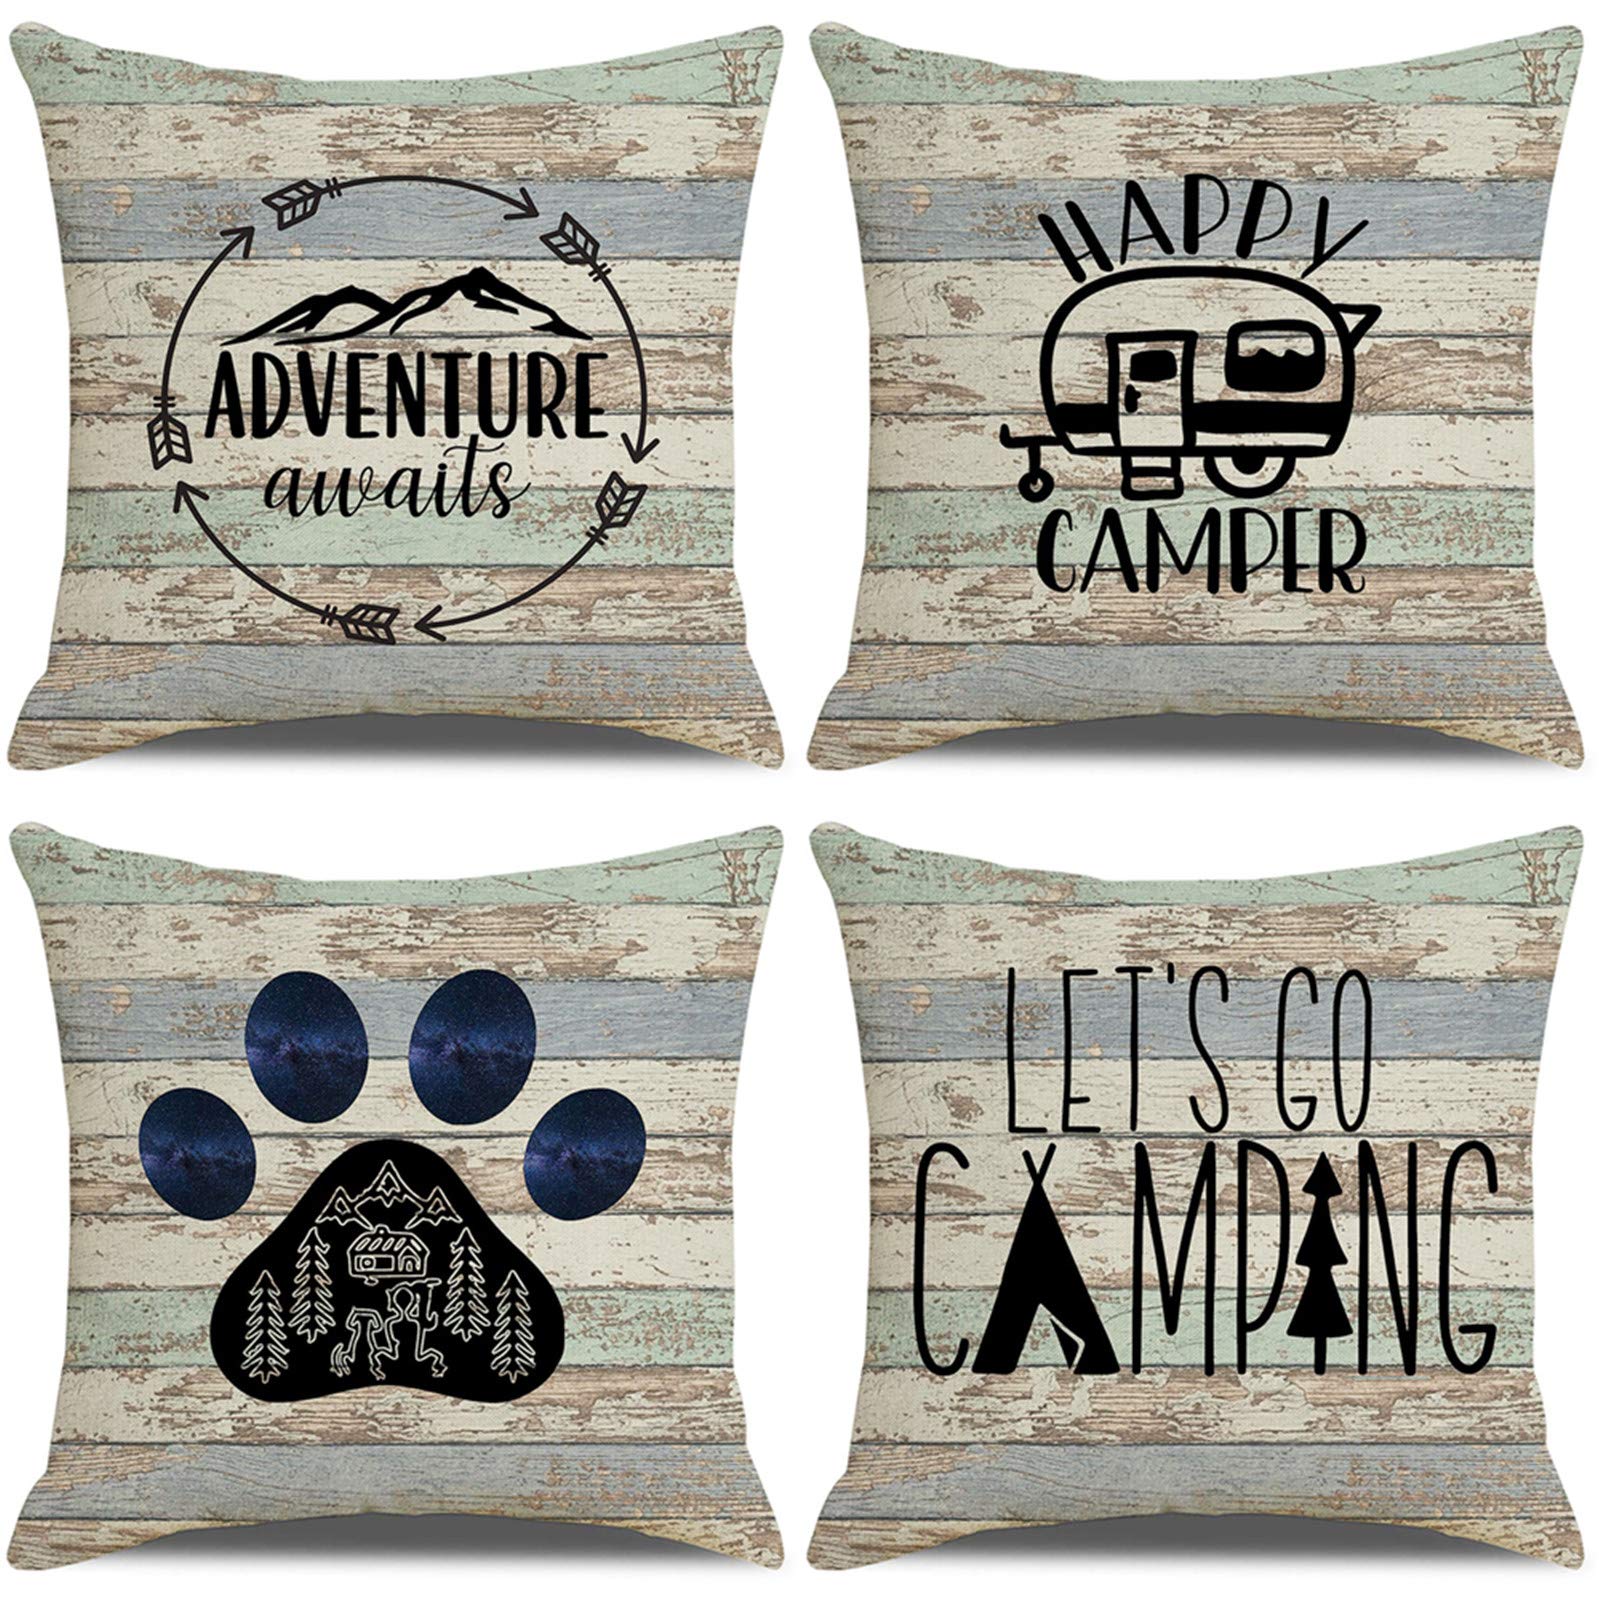 LAXEUYO Pack of 4 Cushion Covers 18x18, Let's go Adventure Camping Pattern Cotton Linen Decorative Throw Pillow Covers Pillow Cases for Sofa